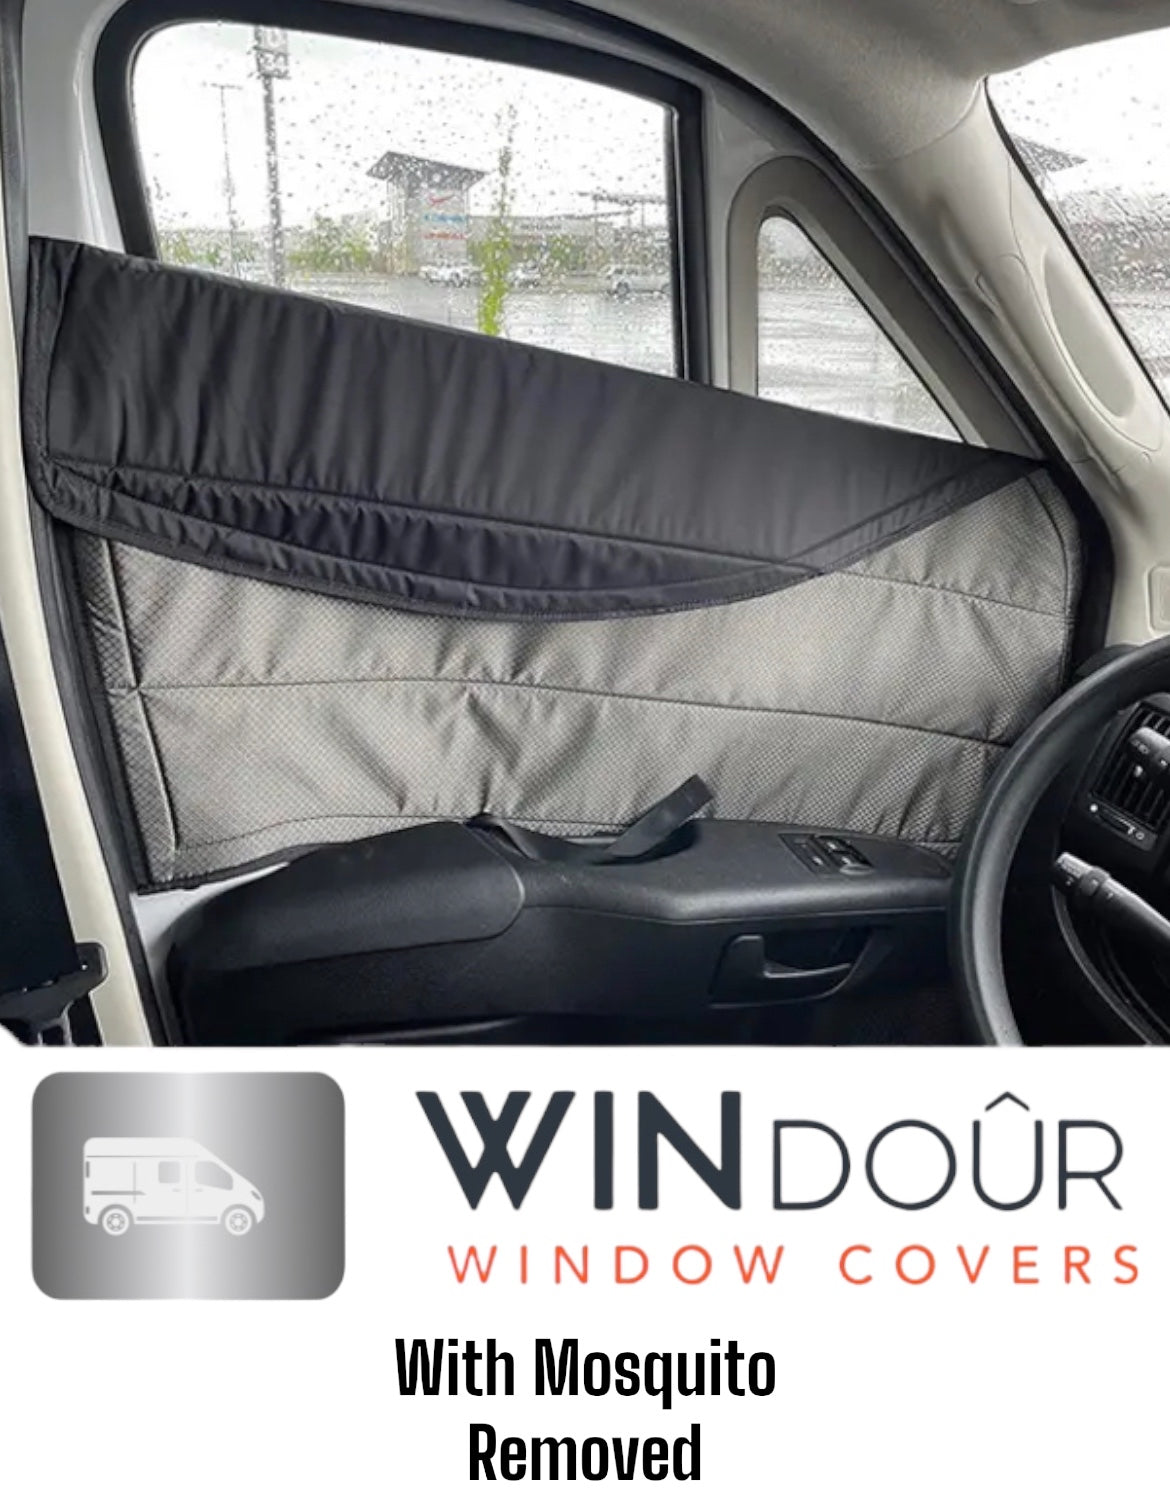 WINdoûr Insulated, ￼Blackout, Front Window Covers & Mosquito Sprinter Models.